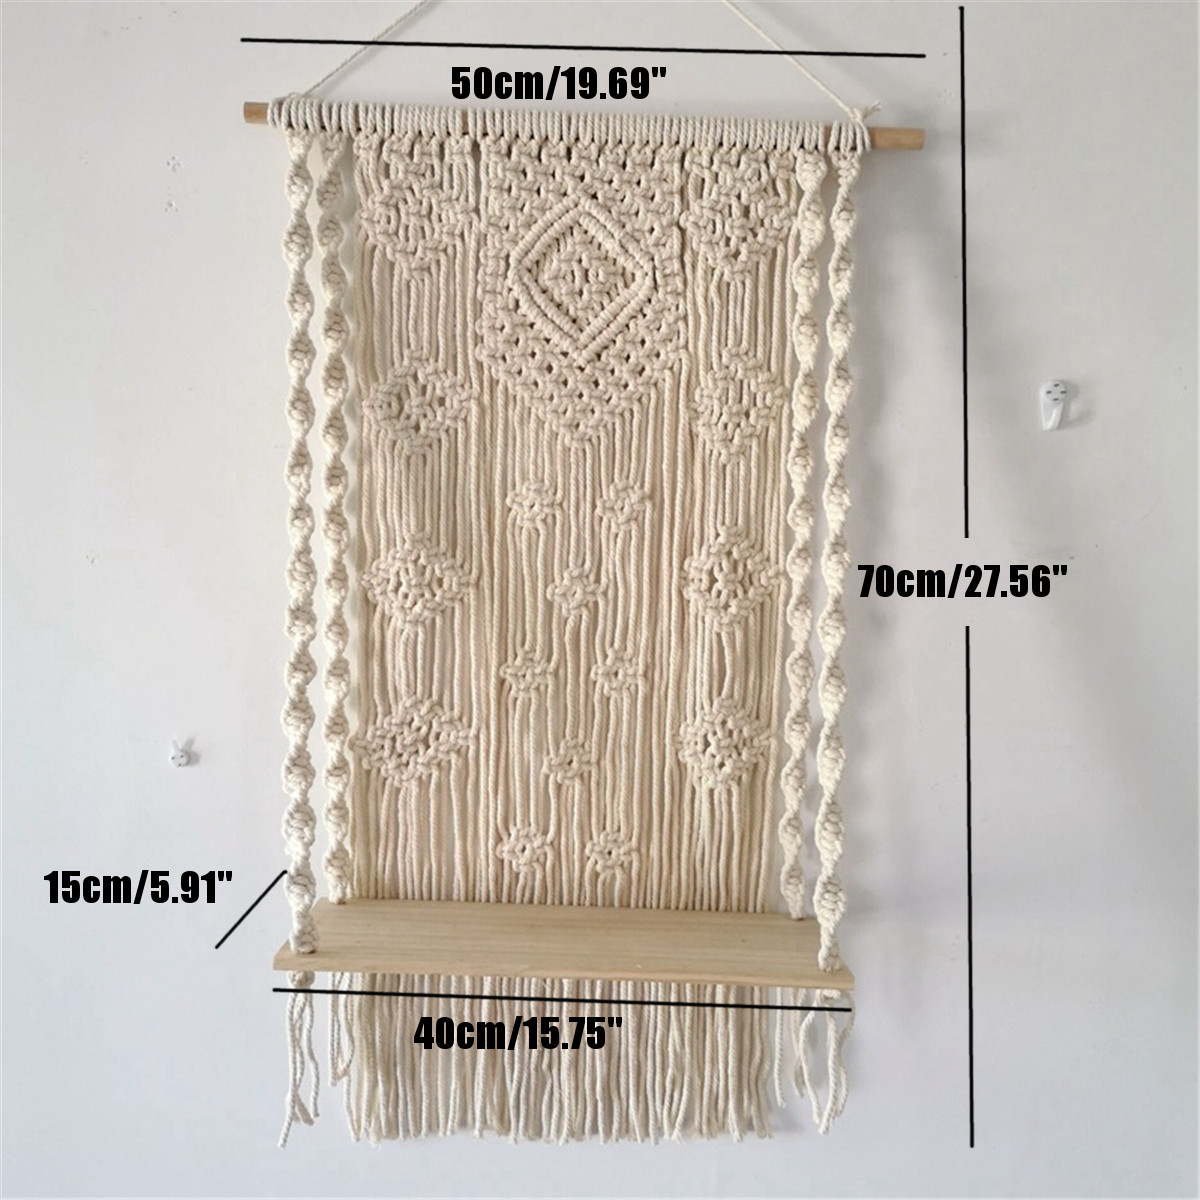 Wall-Hanging-Rack-Macrame-Knitted-Rope-Woven-Tassel-Wall-Hanging-Handmade-Tapestry-Display-Stand-Hom-1795856-1